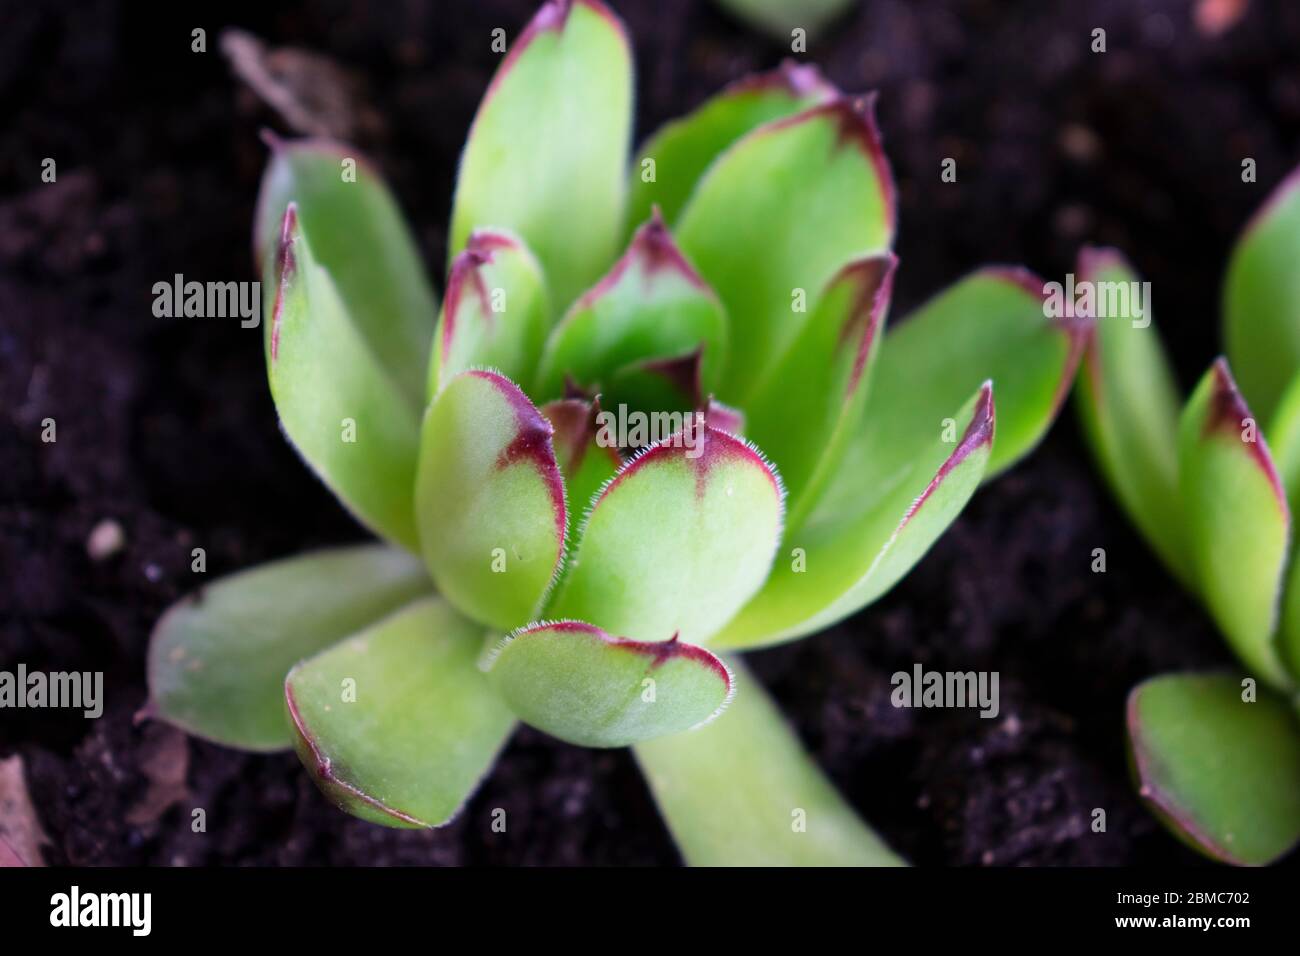 Easily grown Sempervivum Tectorum, also known as Hens and Chicks plant, one of natures hardy succulent plants with geometrically growing leaves. -03 Stock Photo